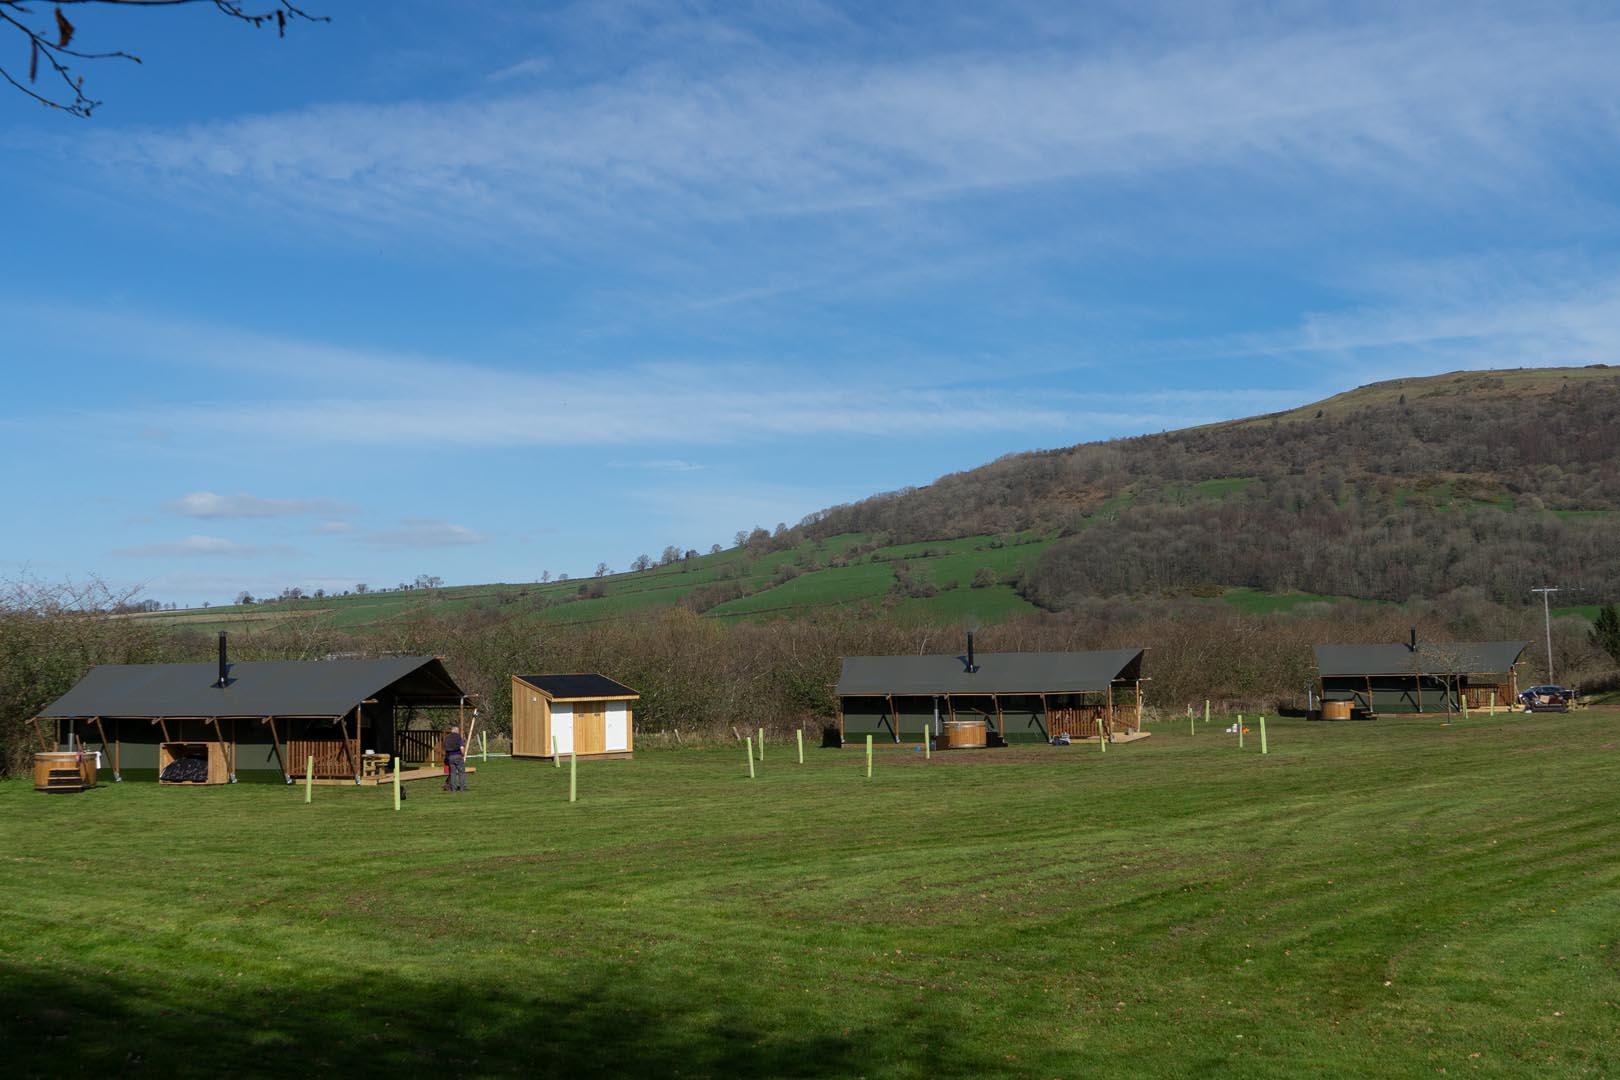 Gilestone Farm is a few minutes’ stroll from the hiking and biking hub of Talybont on the edge of the national park.